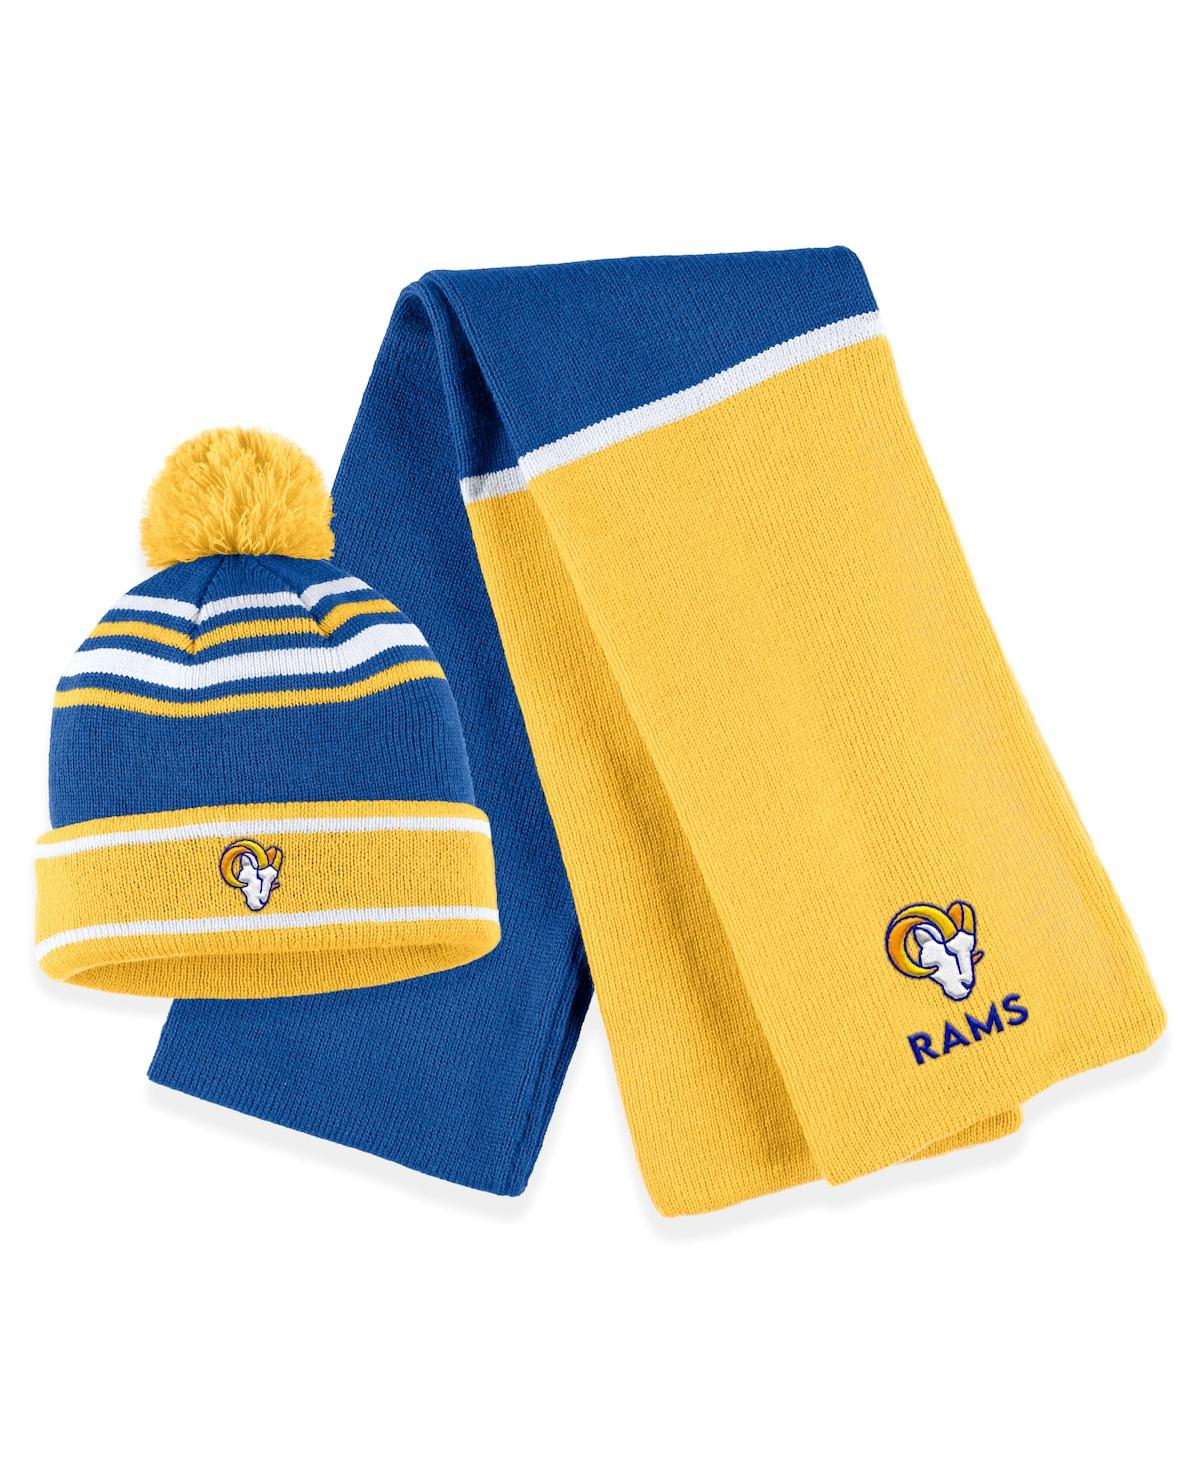 Women's Wear by Erin Andrews Royal Los Angeles Rams Colorblock Cuffed Knit Hat with Pom and Scarf Set - Royal